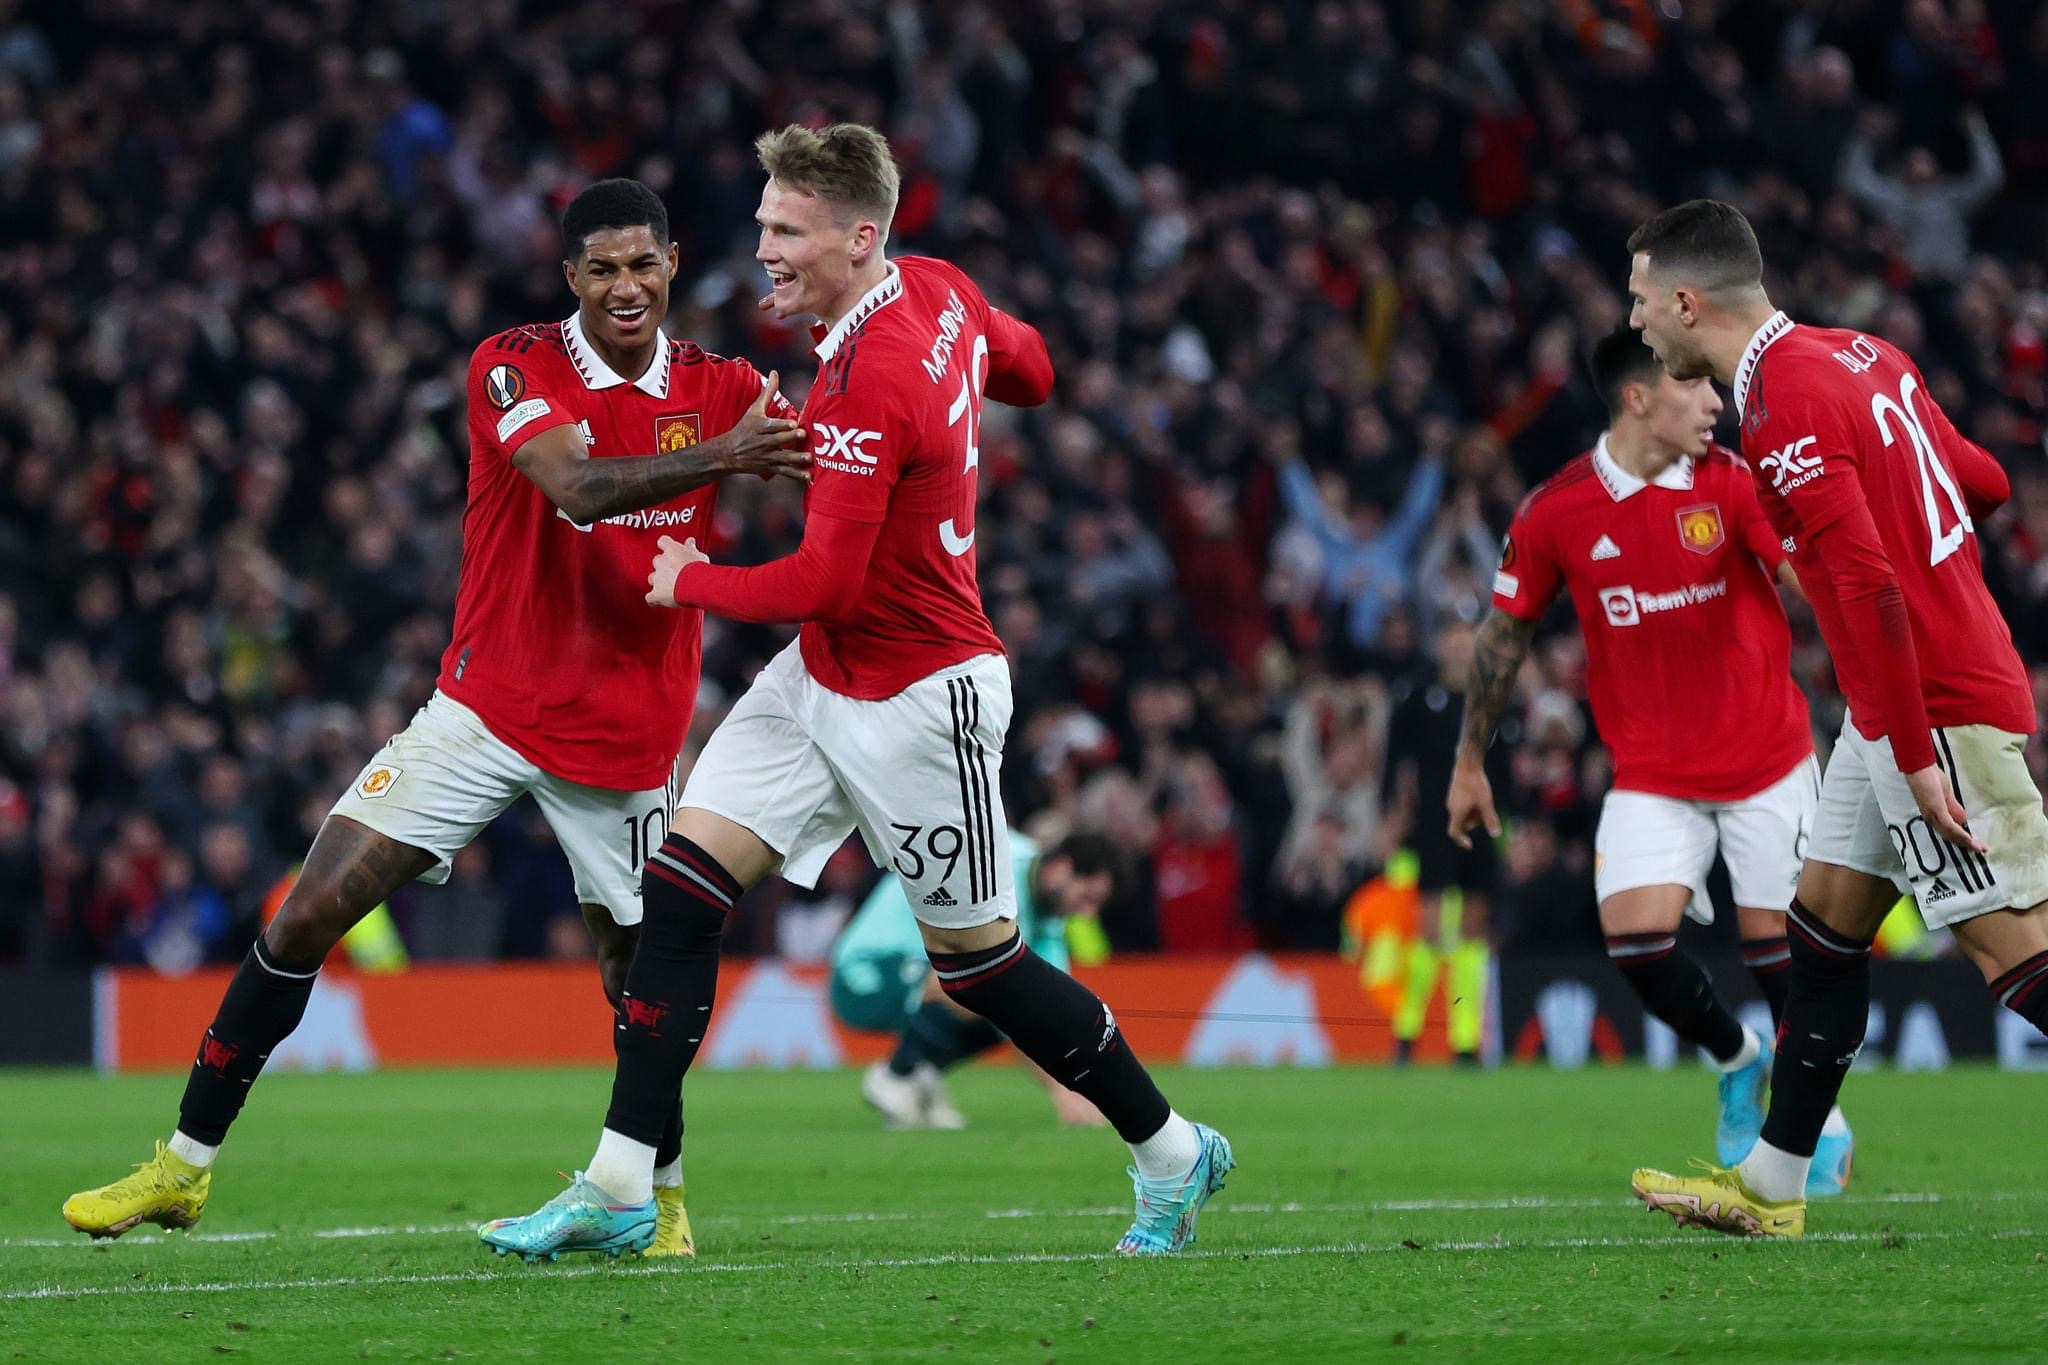 Manchester United players celebrate a goal in their Europa League match against Omonia Nicosia on 13 October 2022.